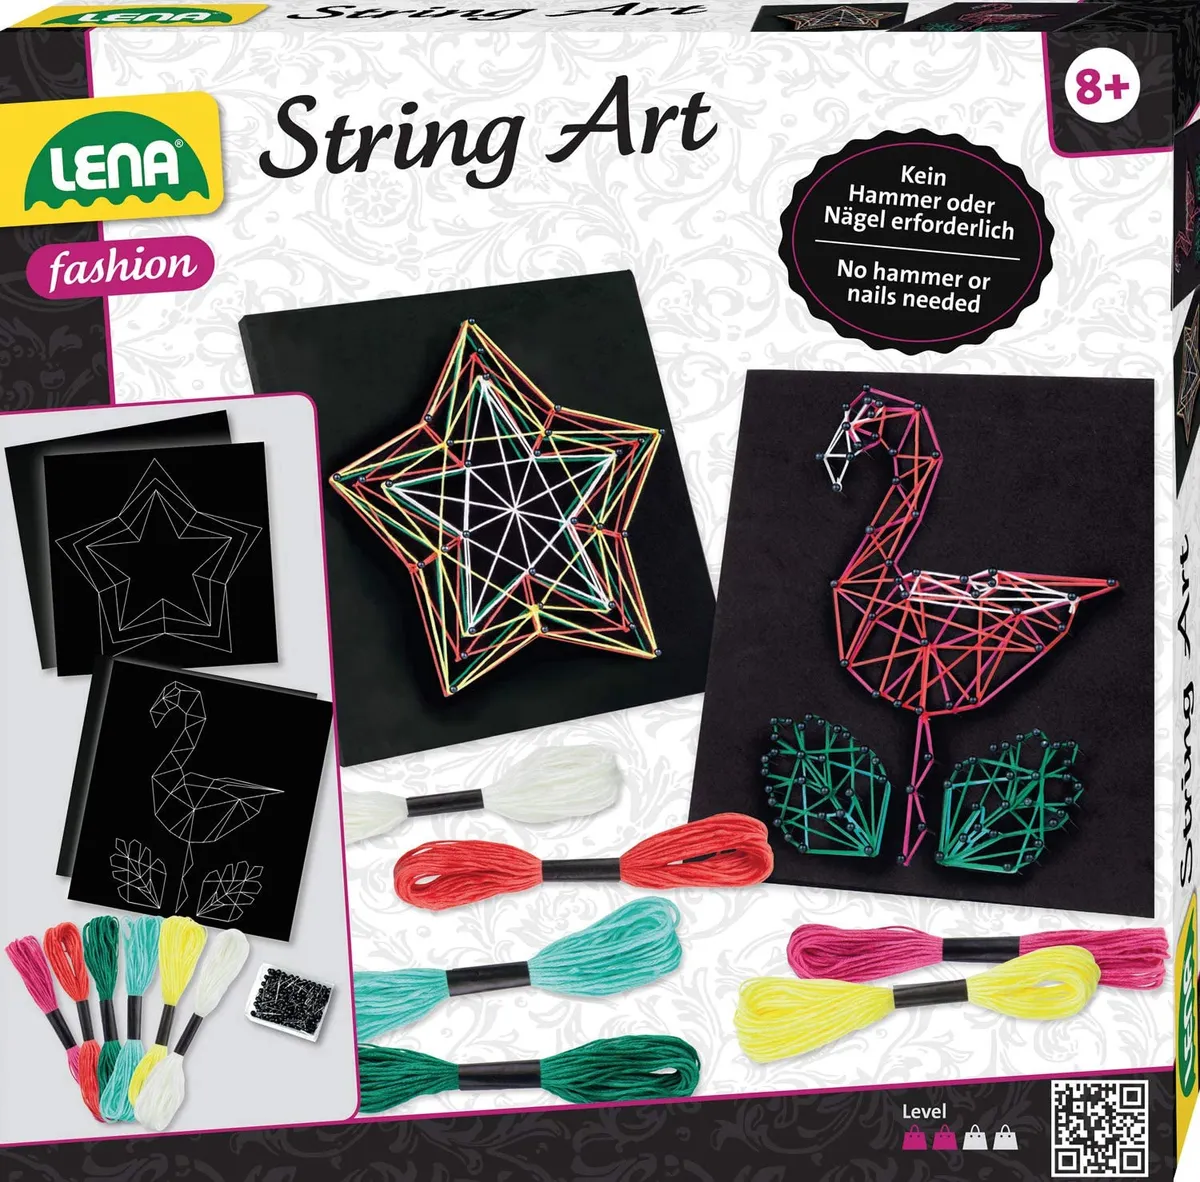 LENA string art kit box with string art flamingo and star on the front